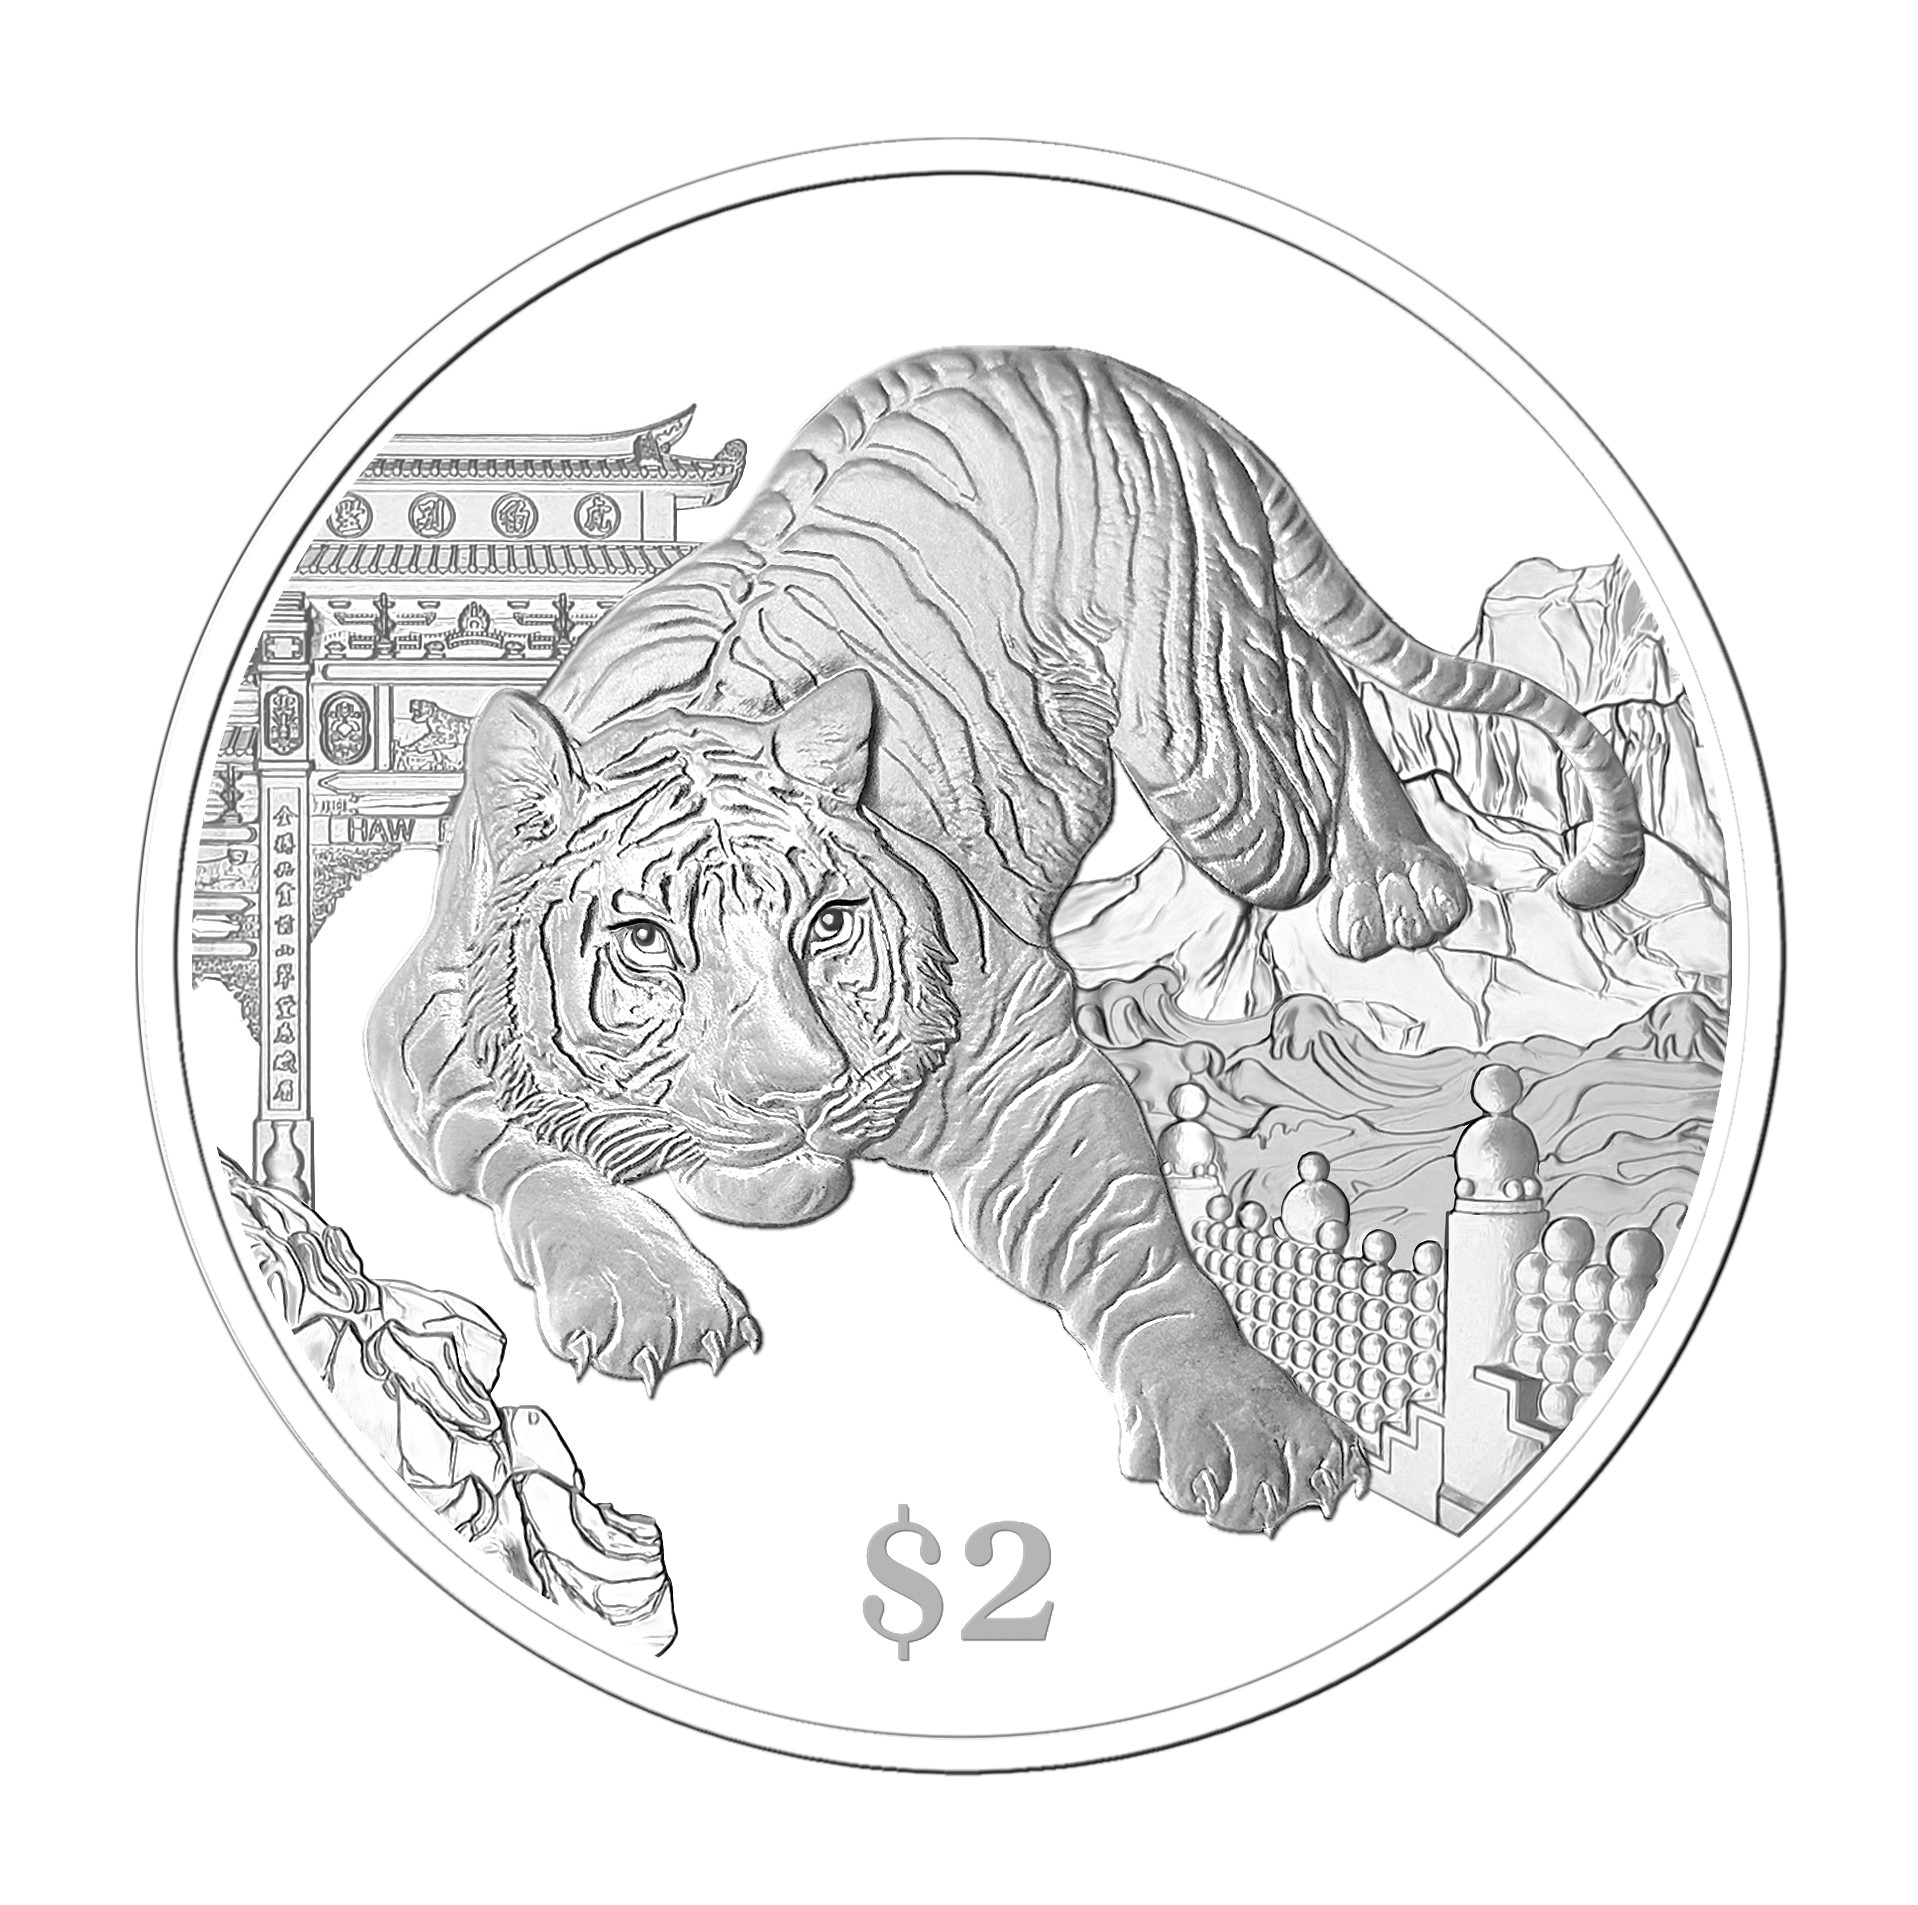 Nickel-plated zinc proof-like coin 1